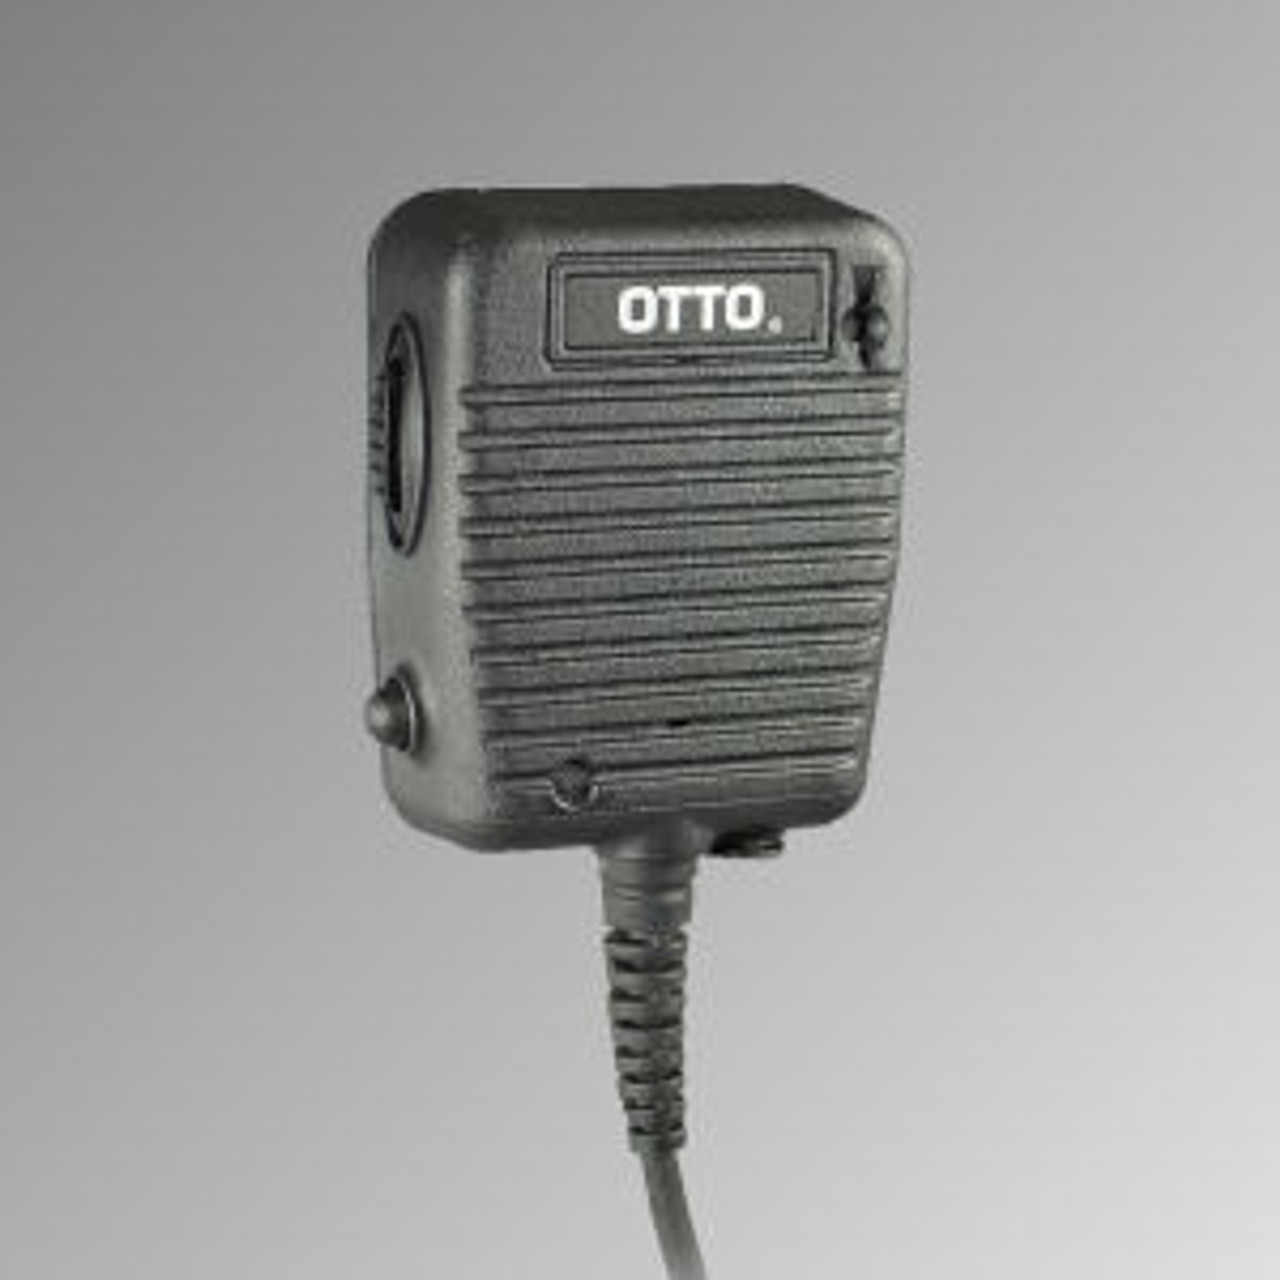 Otto Storm Mic For ICOM F4400D